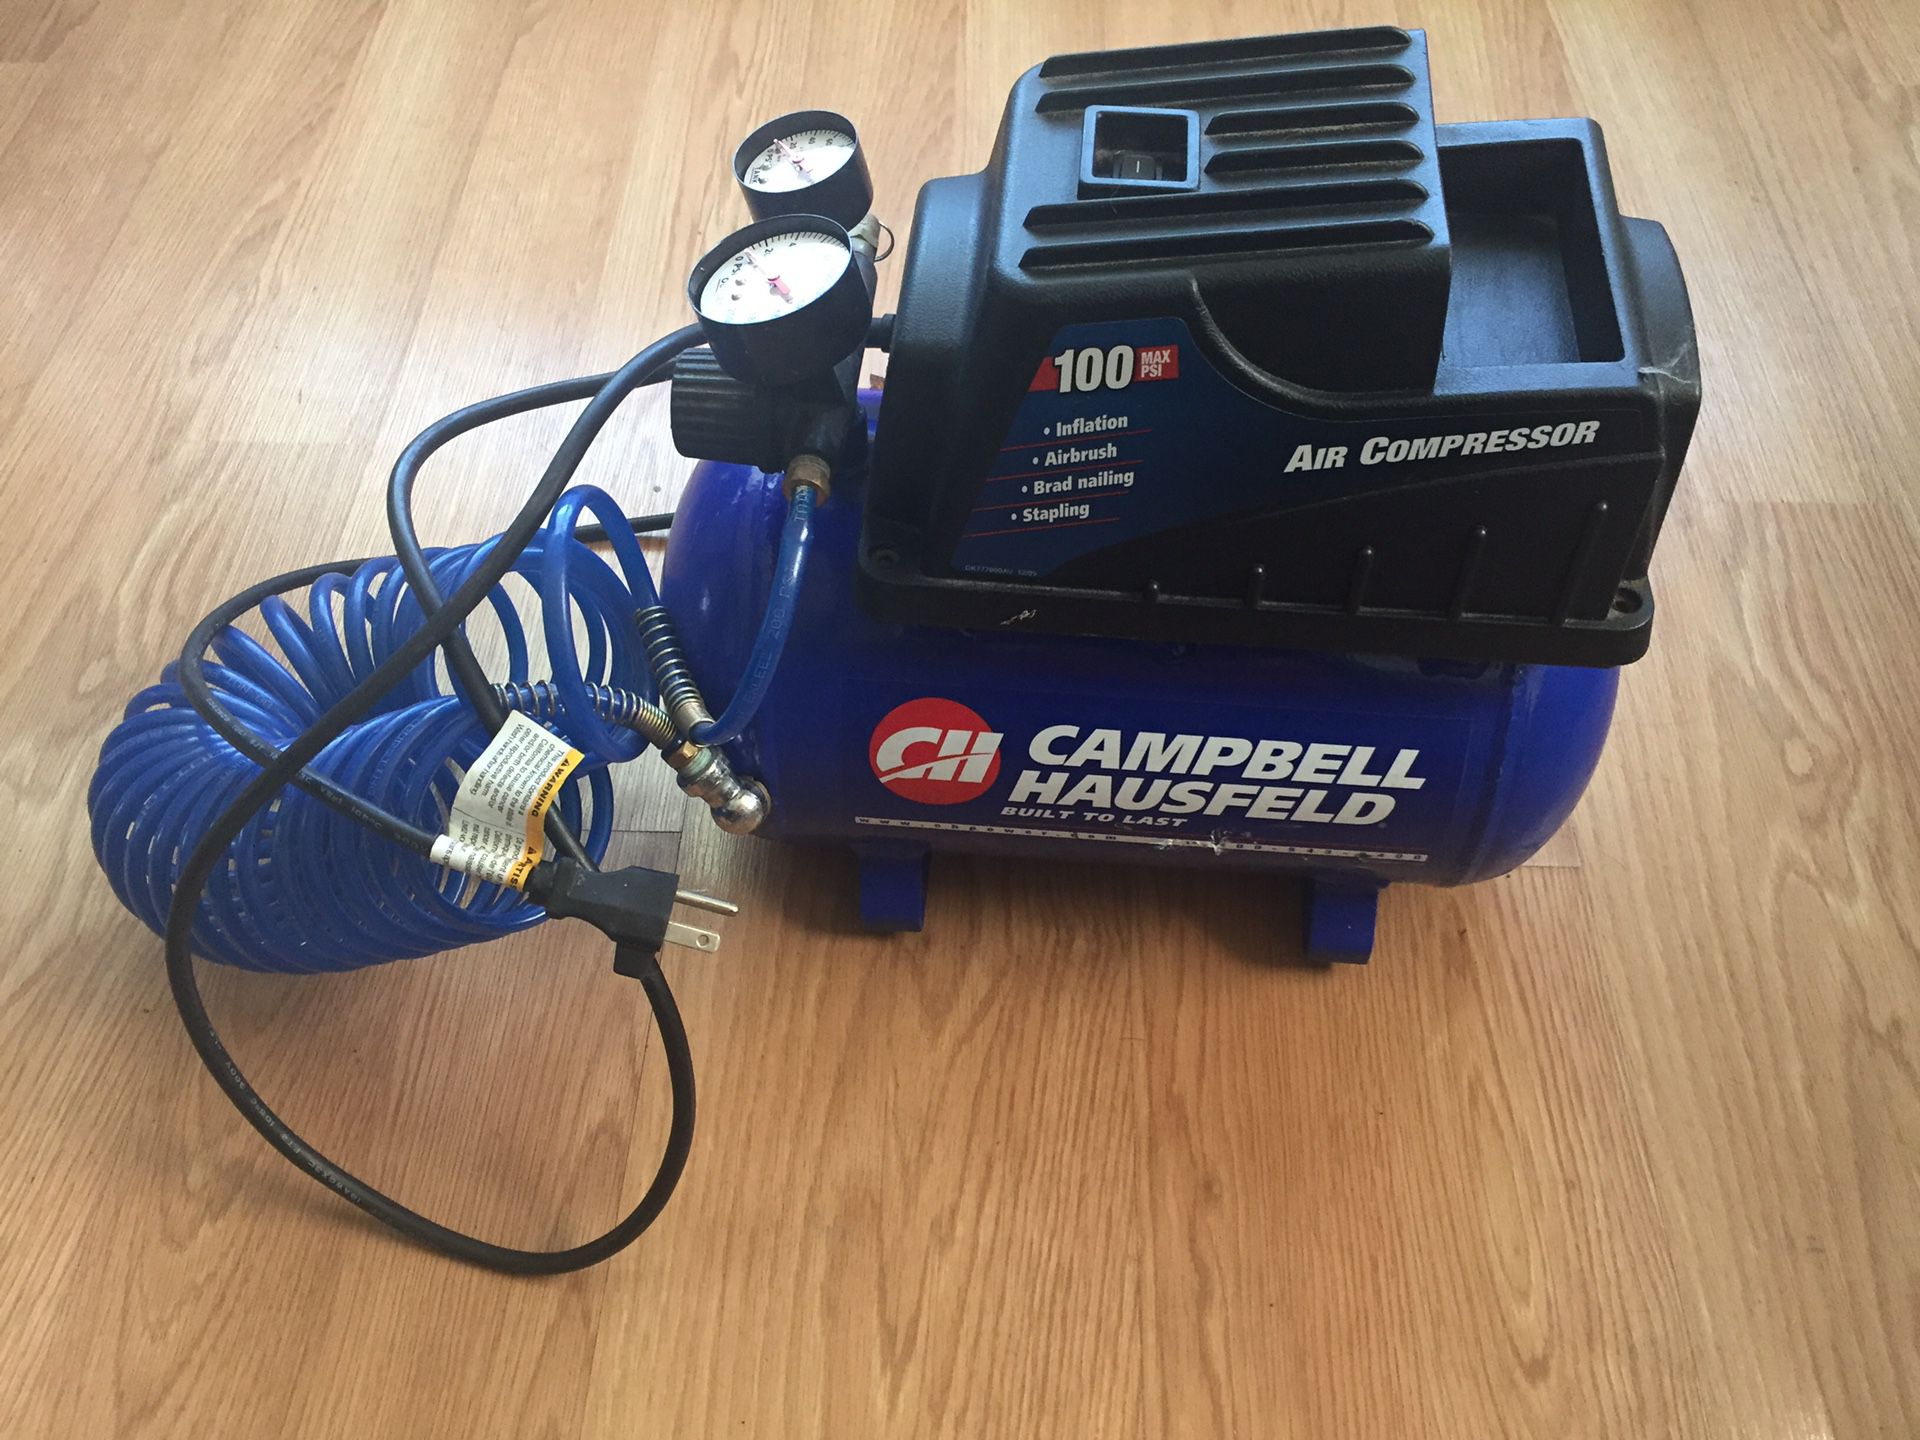 Fairly used Air Compressor, 100 MAX PSI, Good working condition.